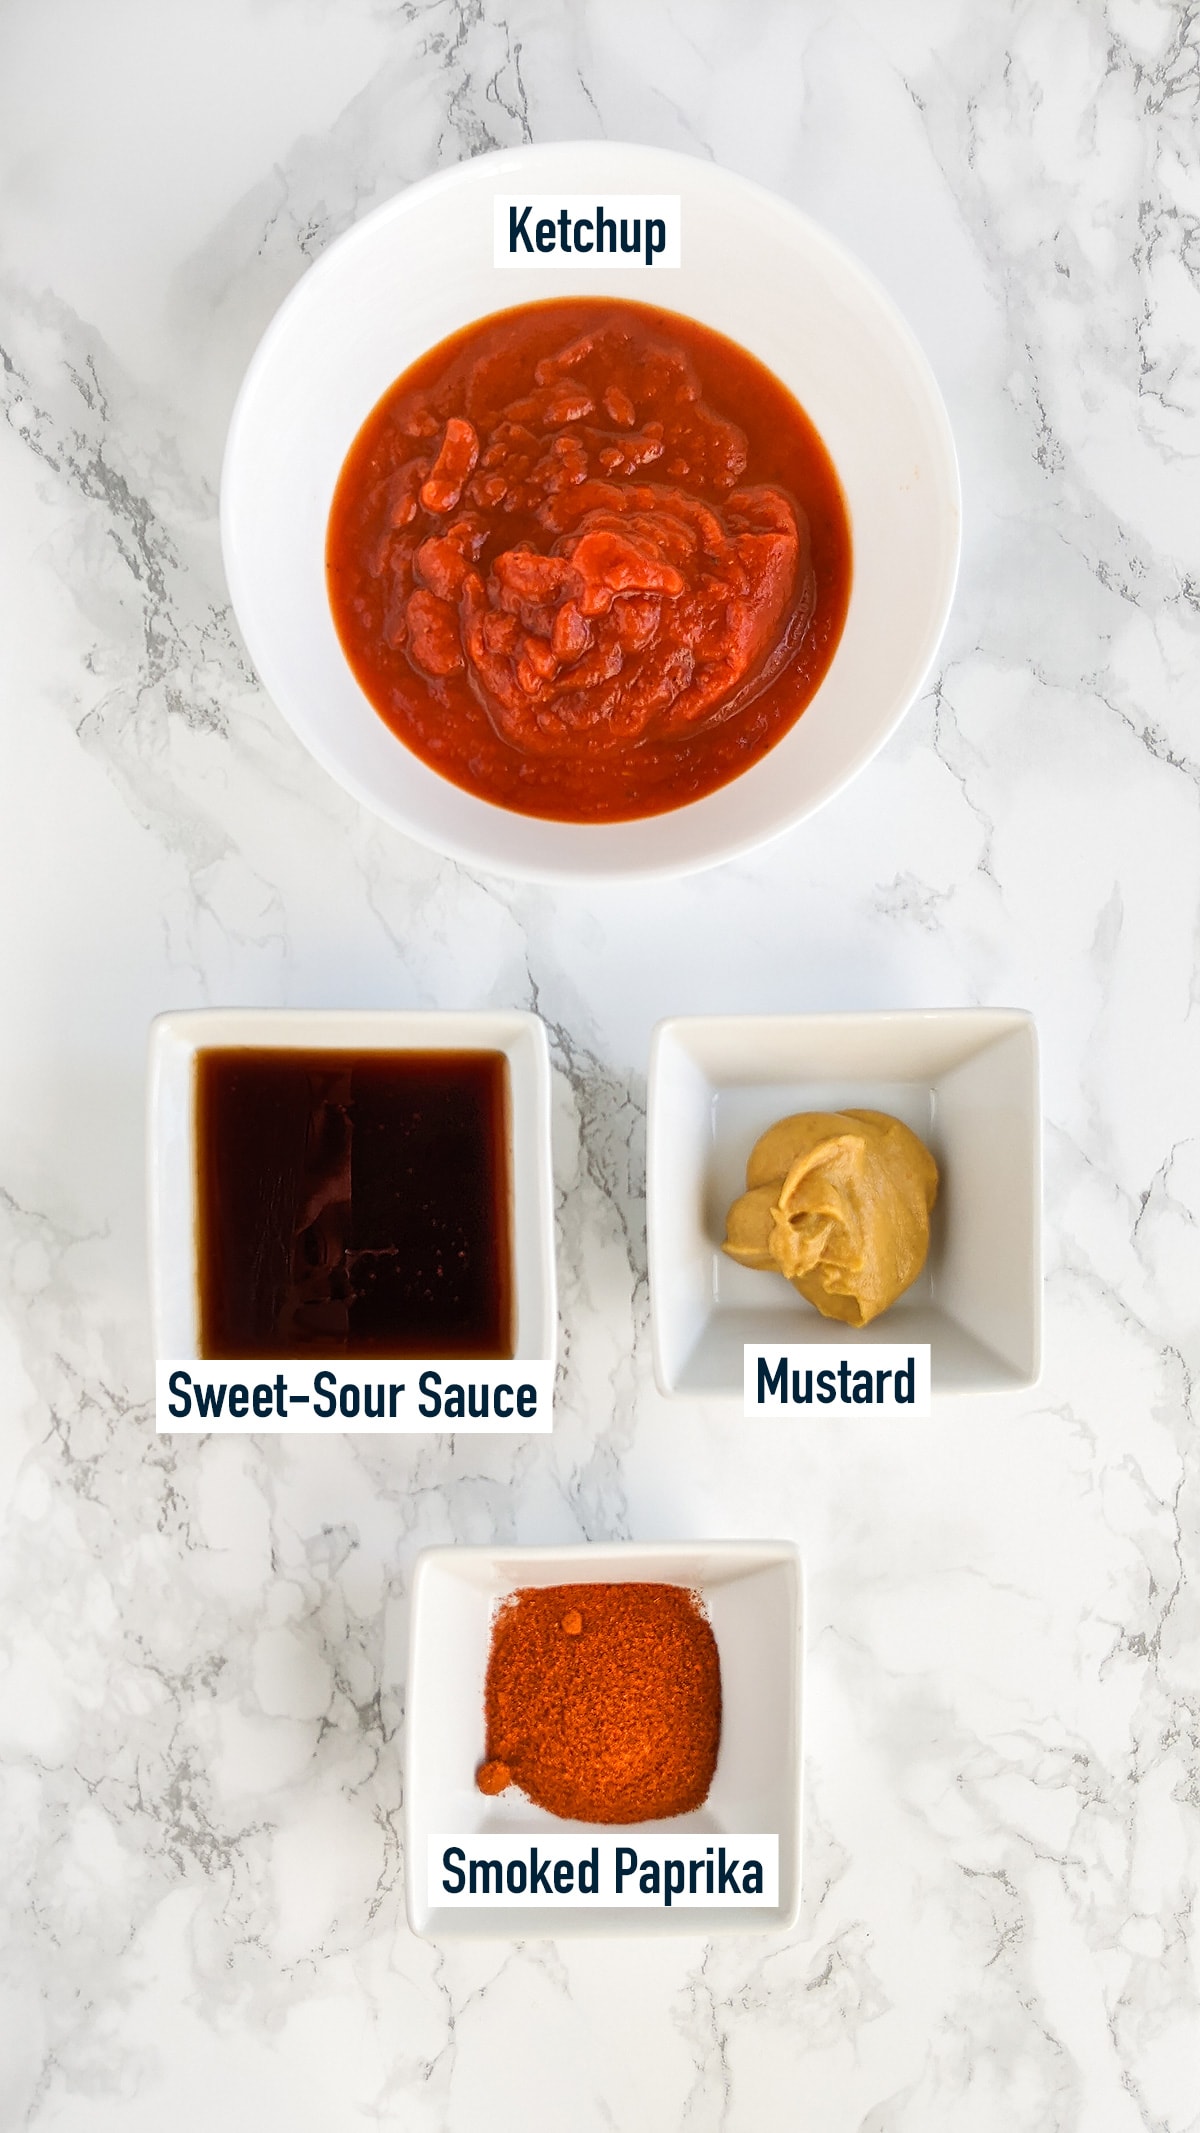 Ketchup, sweet-sour sauce, mustard, smoked paprika on a marble table.